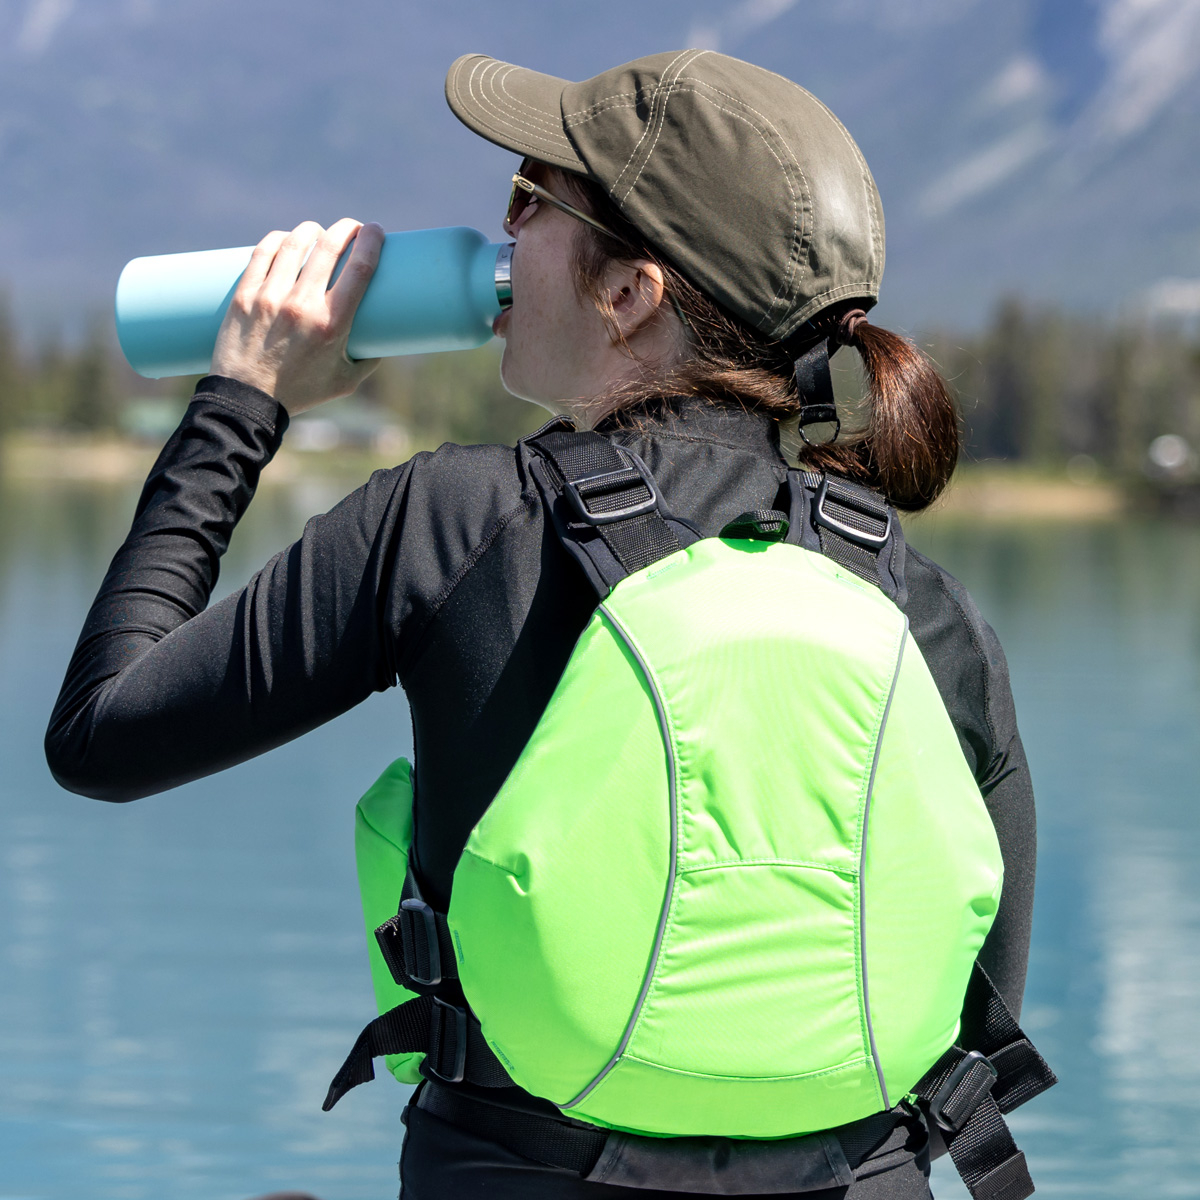 Amazon Shoppers Love This Travel-Friendly & Leakproof Water Bottle